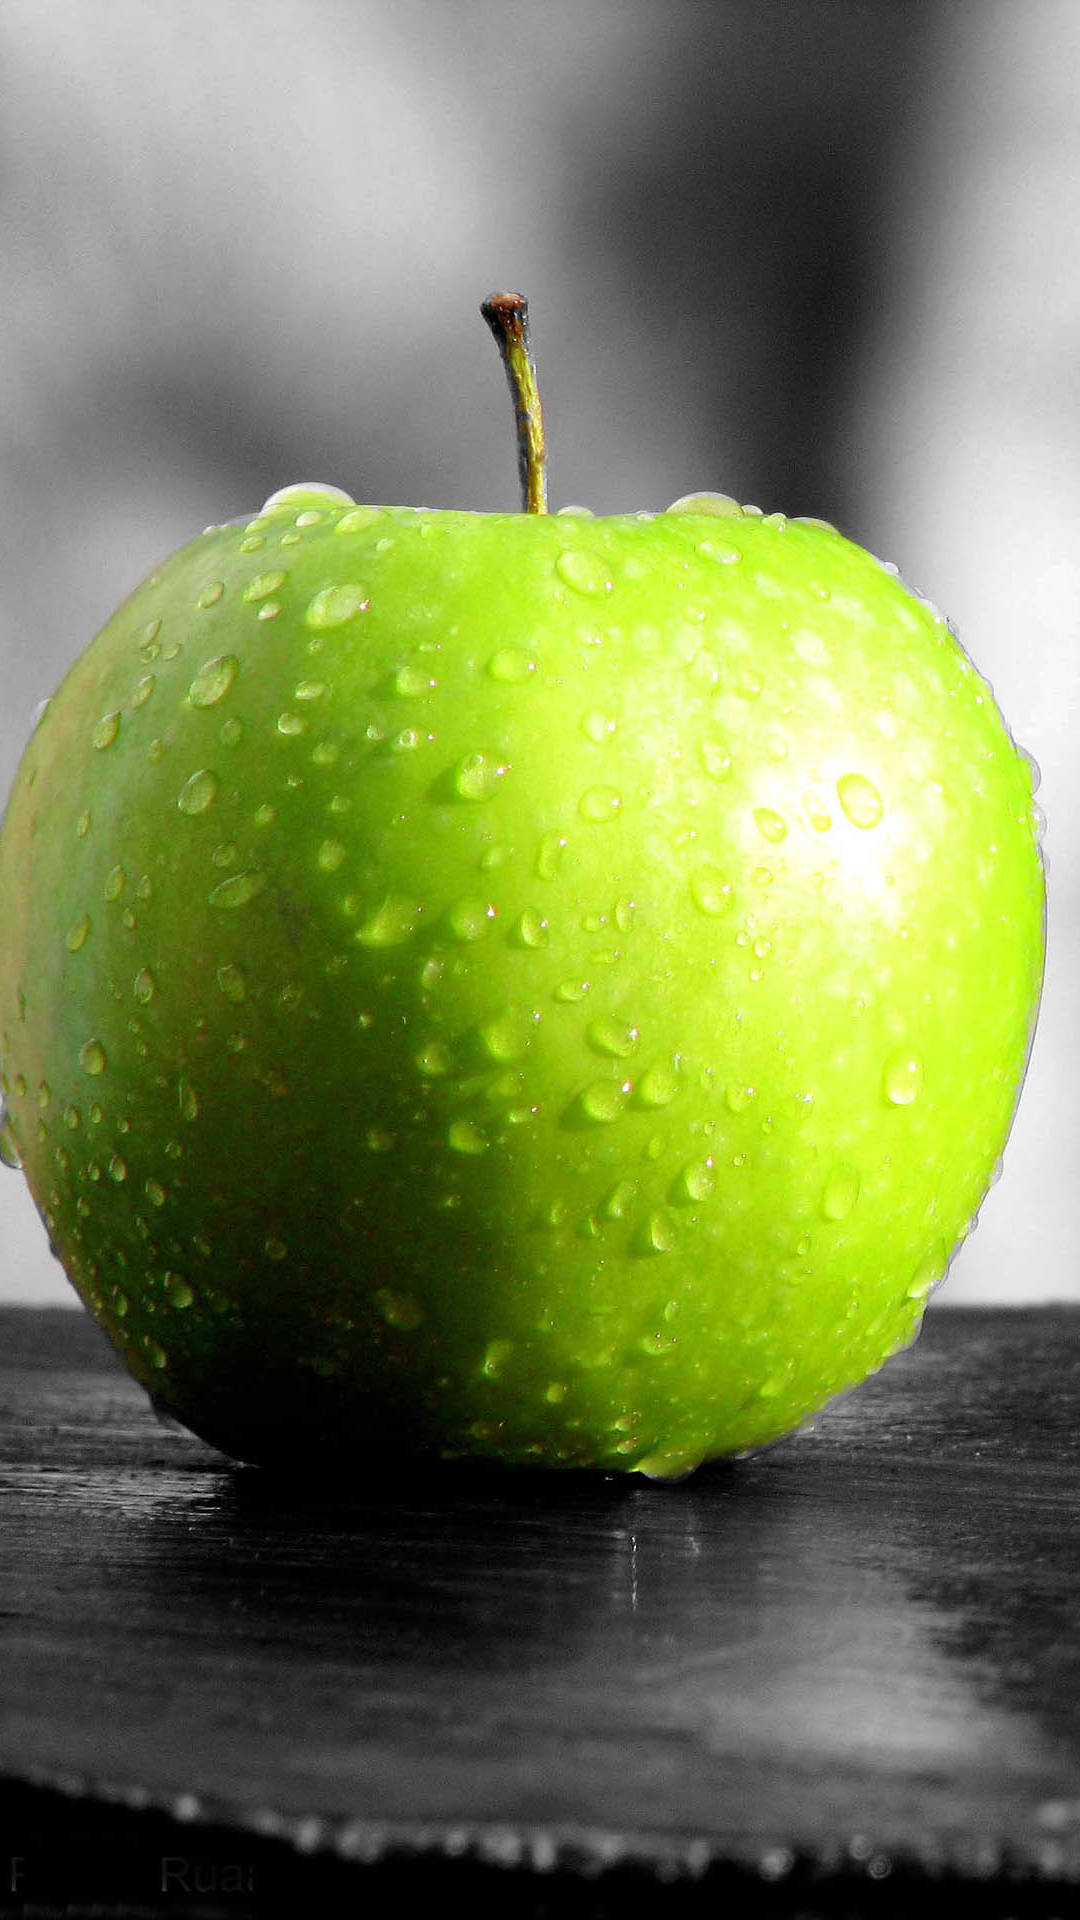 apple wallpaper hd,granny smith,green,apple,natural foods,fruit